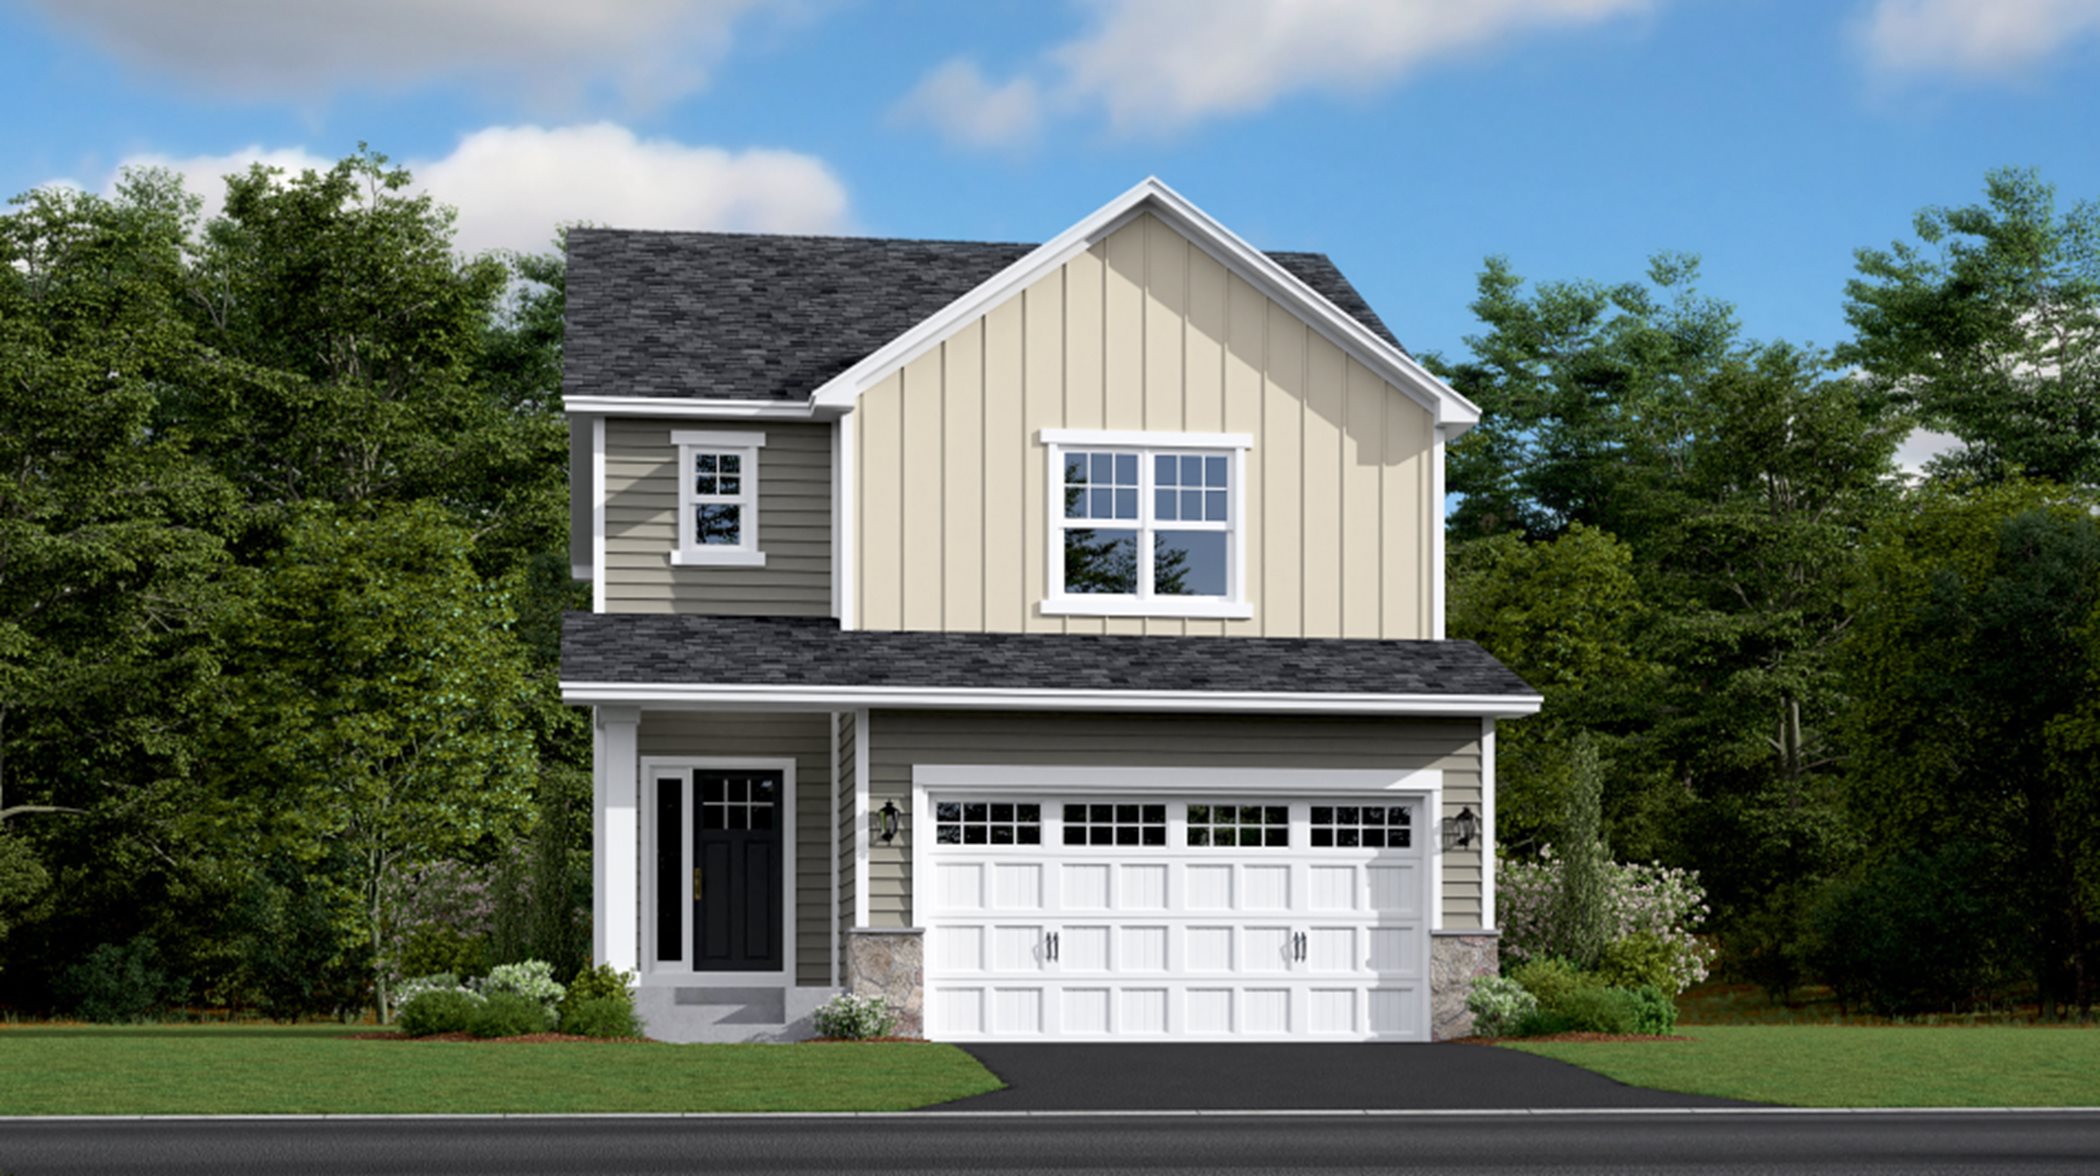 Glade Exterior Rendering A2